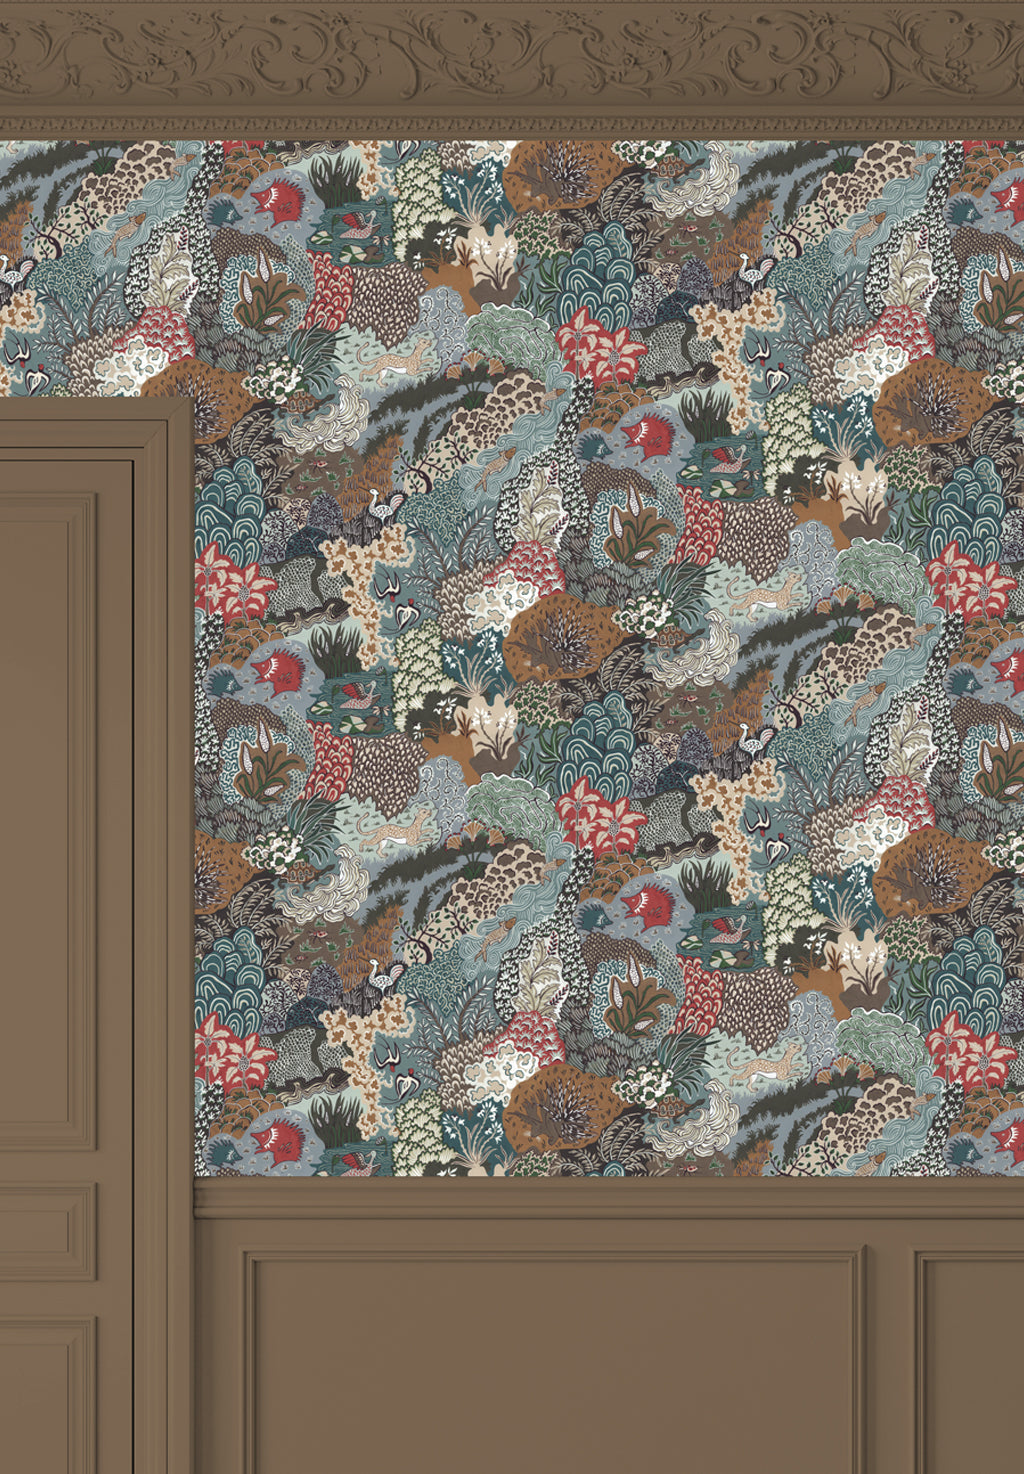 JMW-101901-Whimsical-Clumps-Multi-Room-josephine-munsey-wallpapers-new-multi-animal-floral-printed-british-artisan